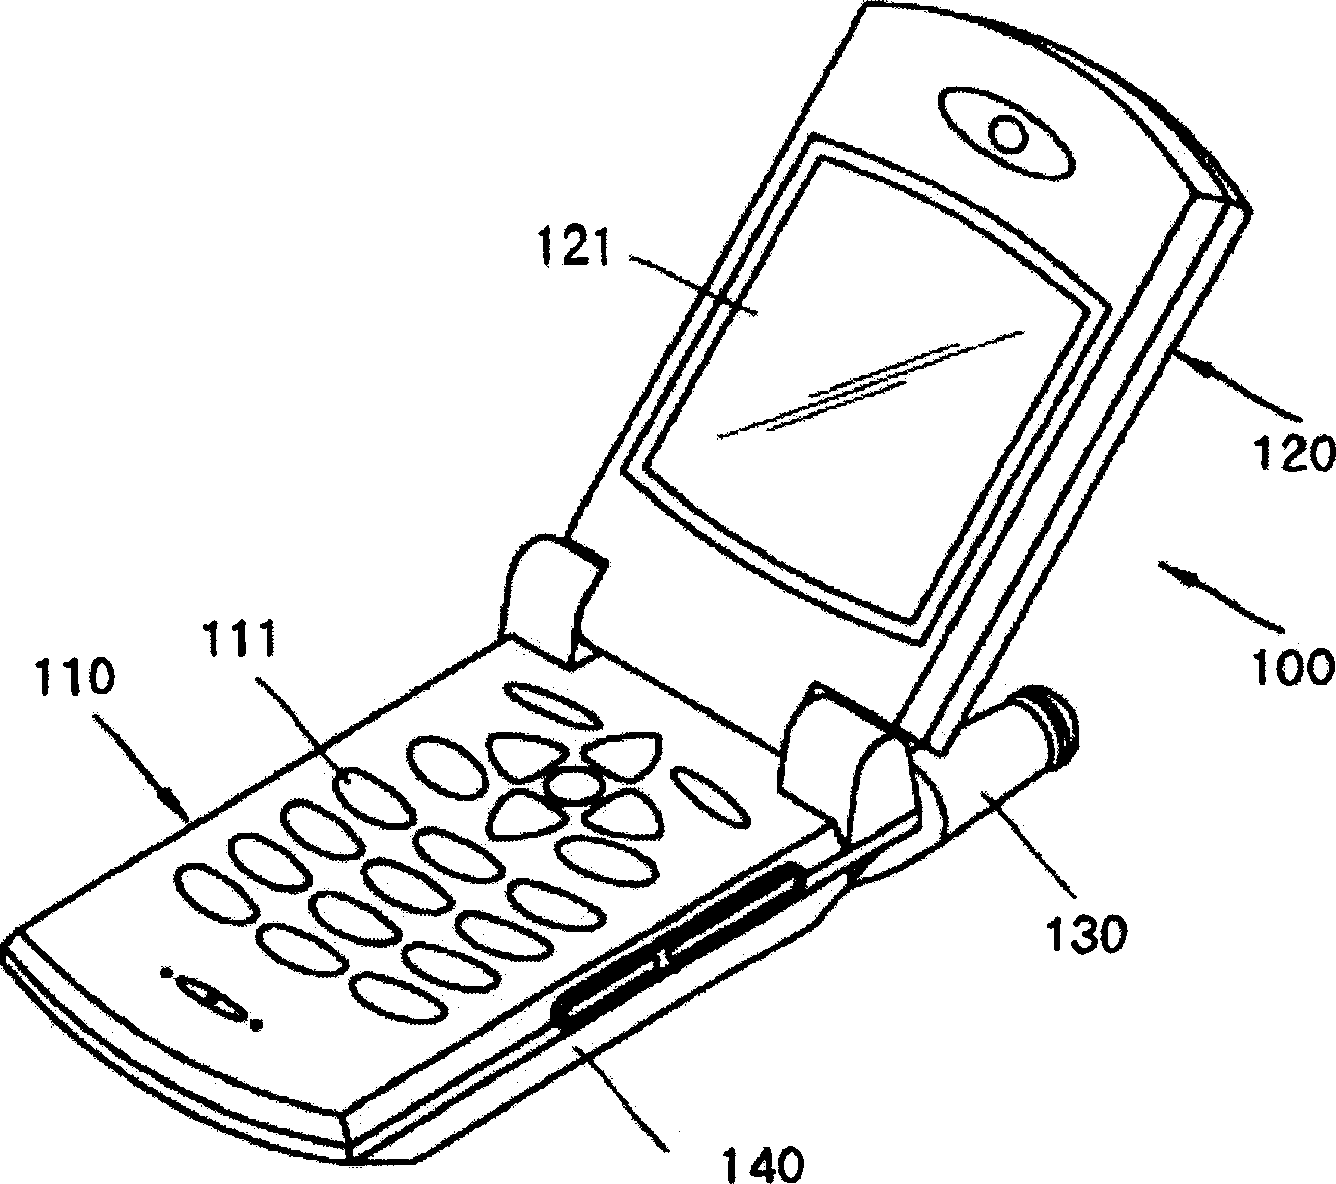 Mobile communication terminal with pile locking device